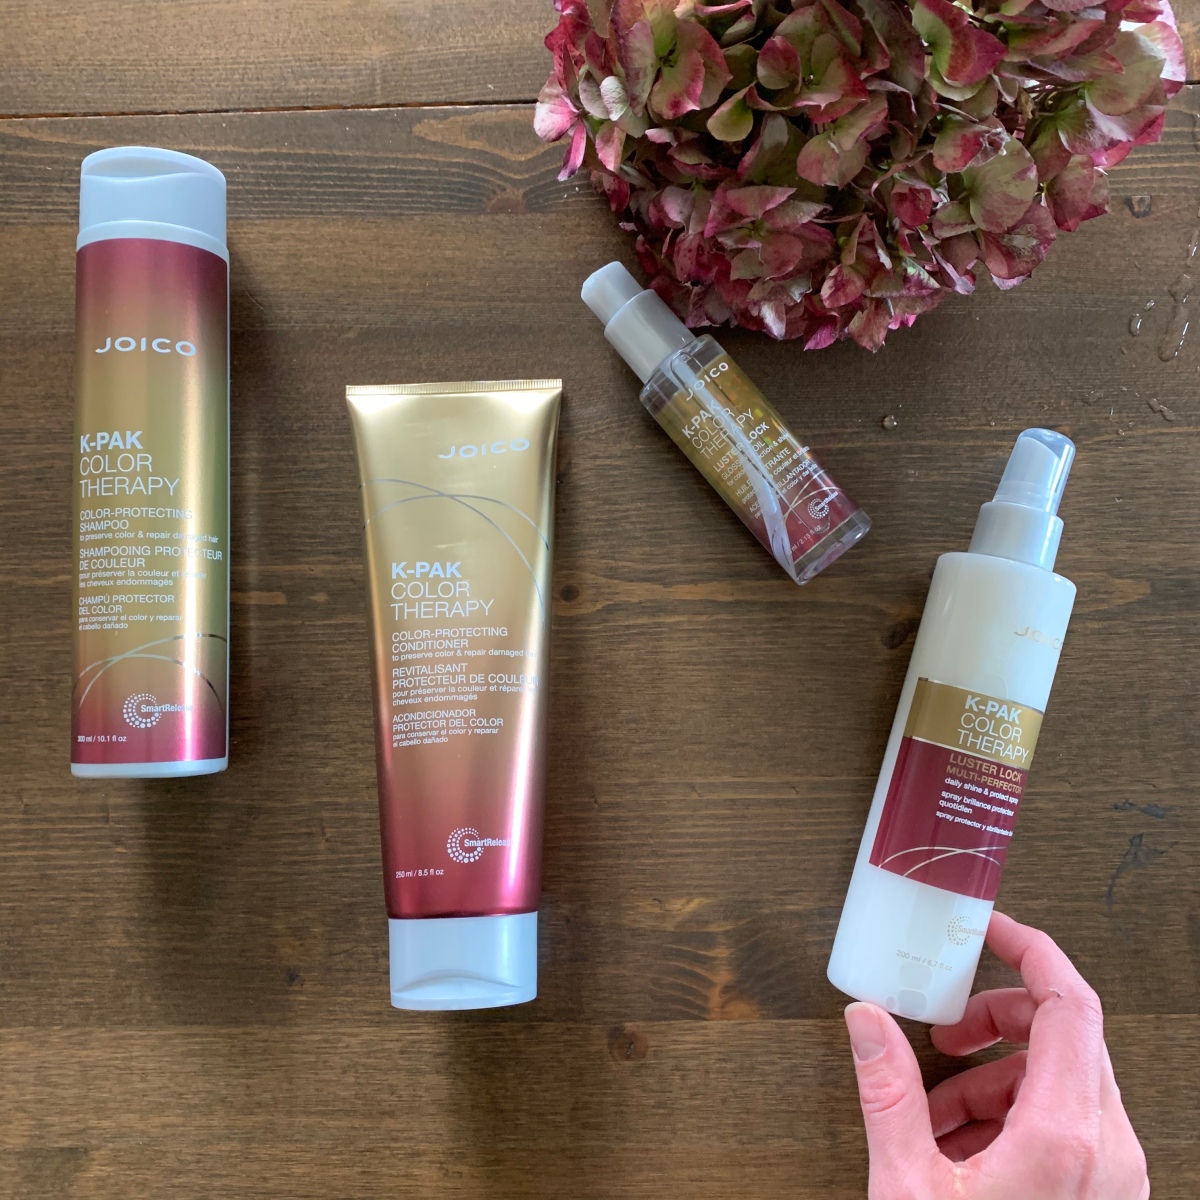 JOICO K-PAK THERAPY Haircare Product Review – leave it to